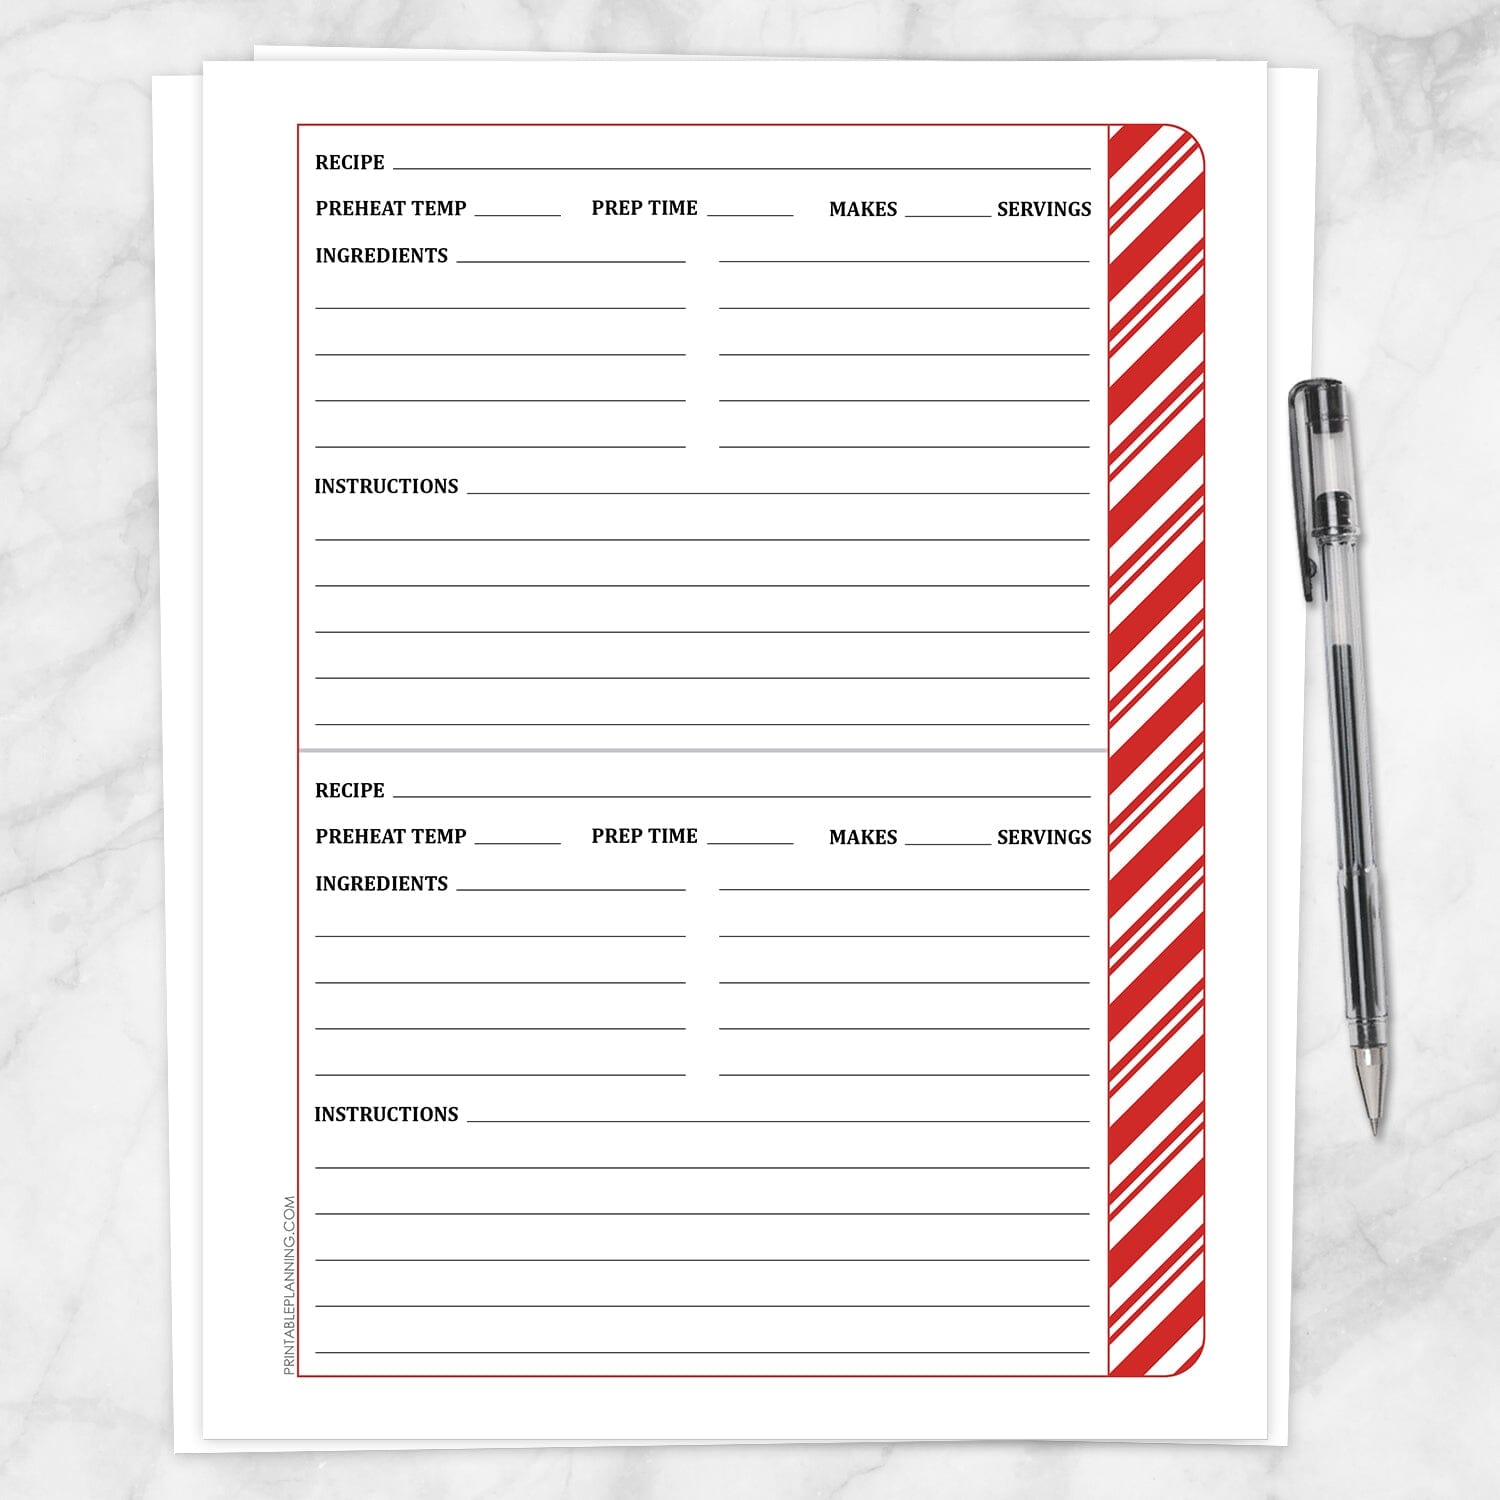 Printable Candy Cane Stripe Christmas Recipe Pages - Front and Back (front side) at Printable Planning.